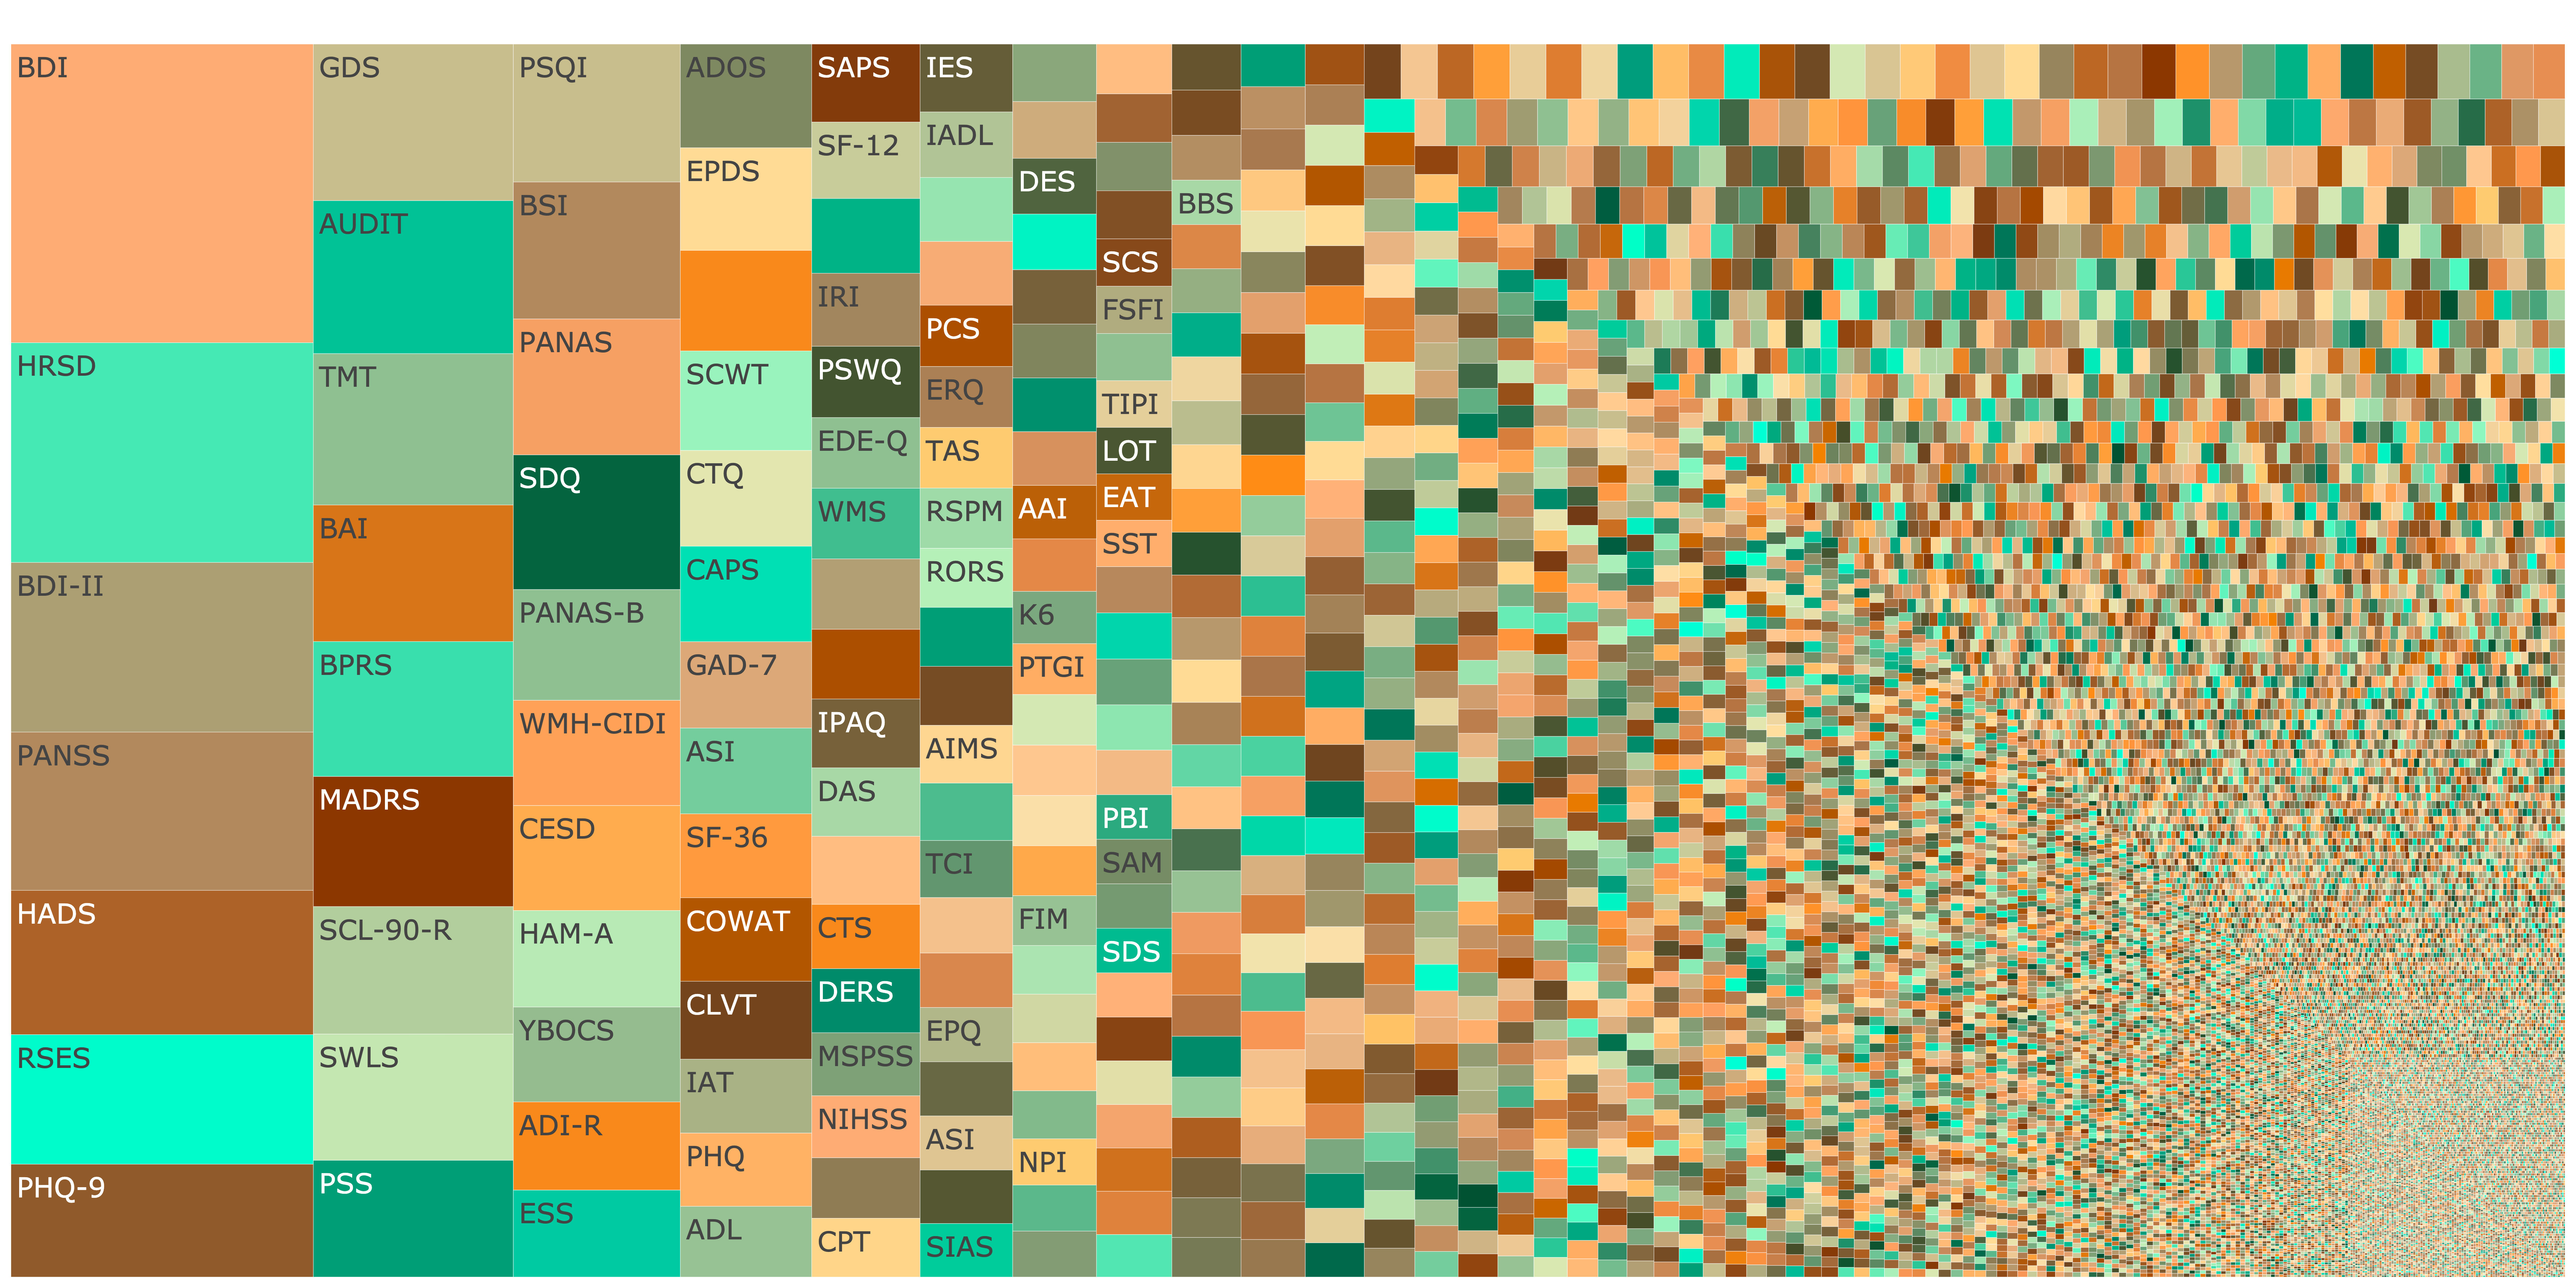 Treemap showing fragmentation across subfields. Normalized Shannon entropy $\eta(X) = 0.71$ <br>Click image to open interactive plot.